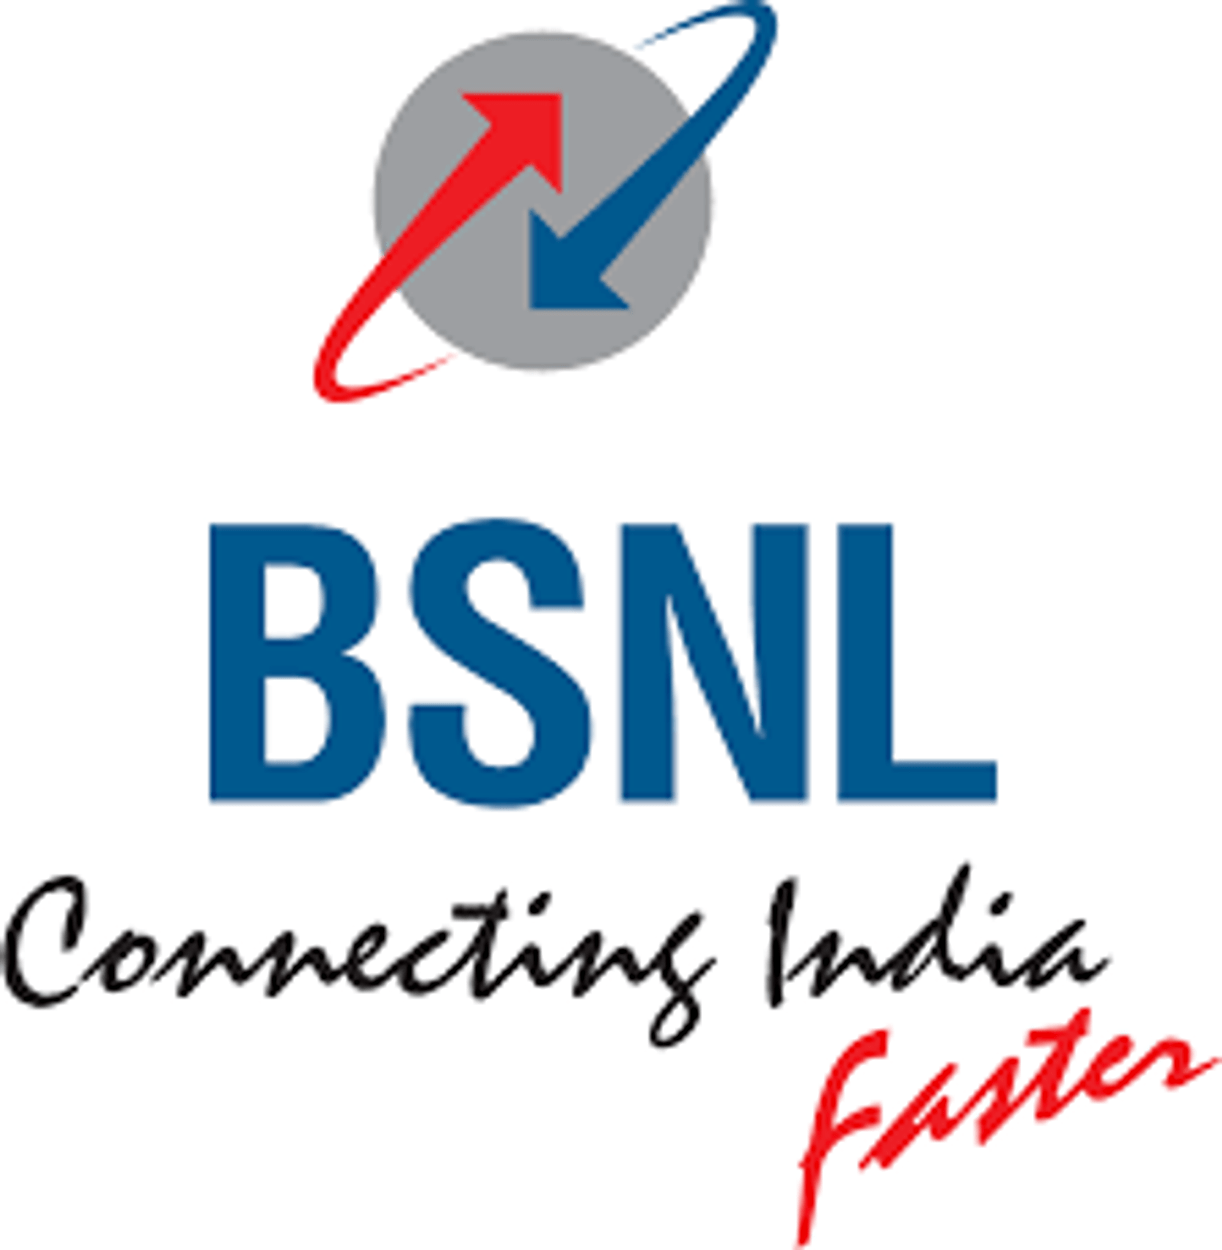 Direction of the DoT not to pay the IDA increase to the non-executives of BSNL: Request for reconsideration